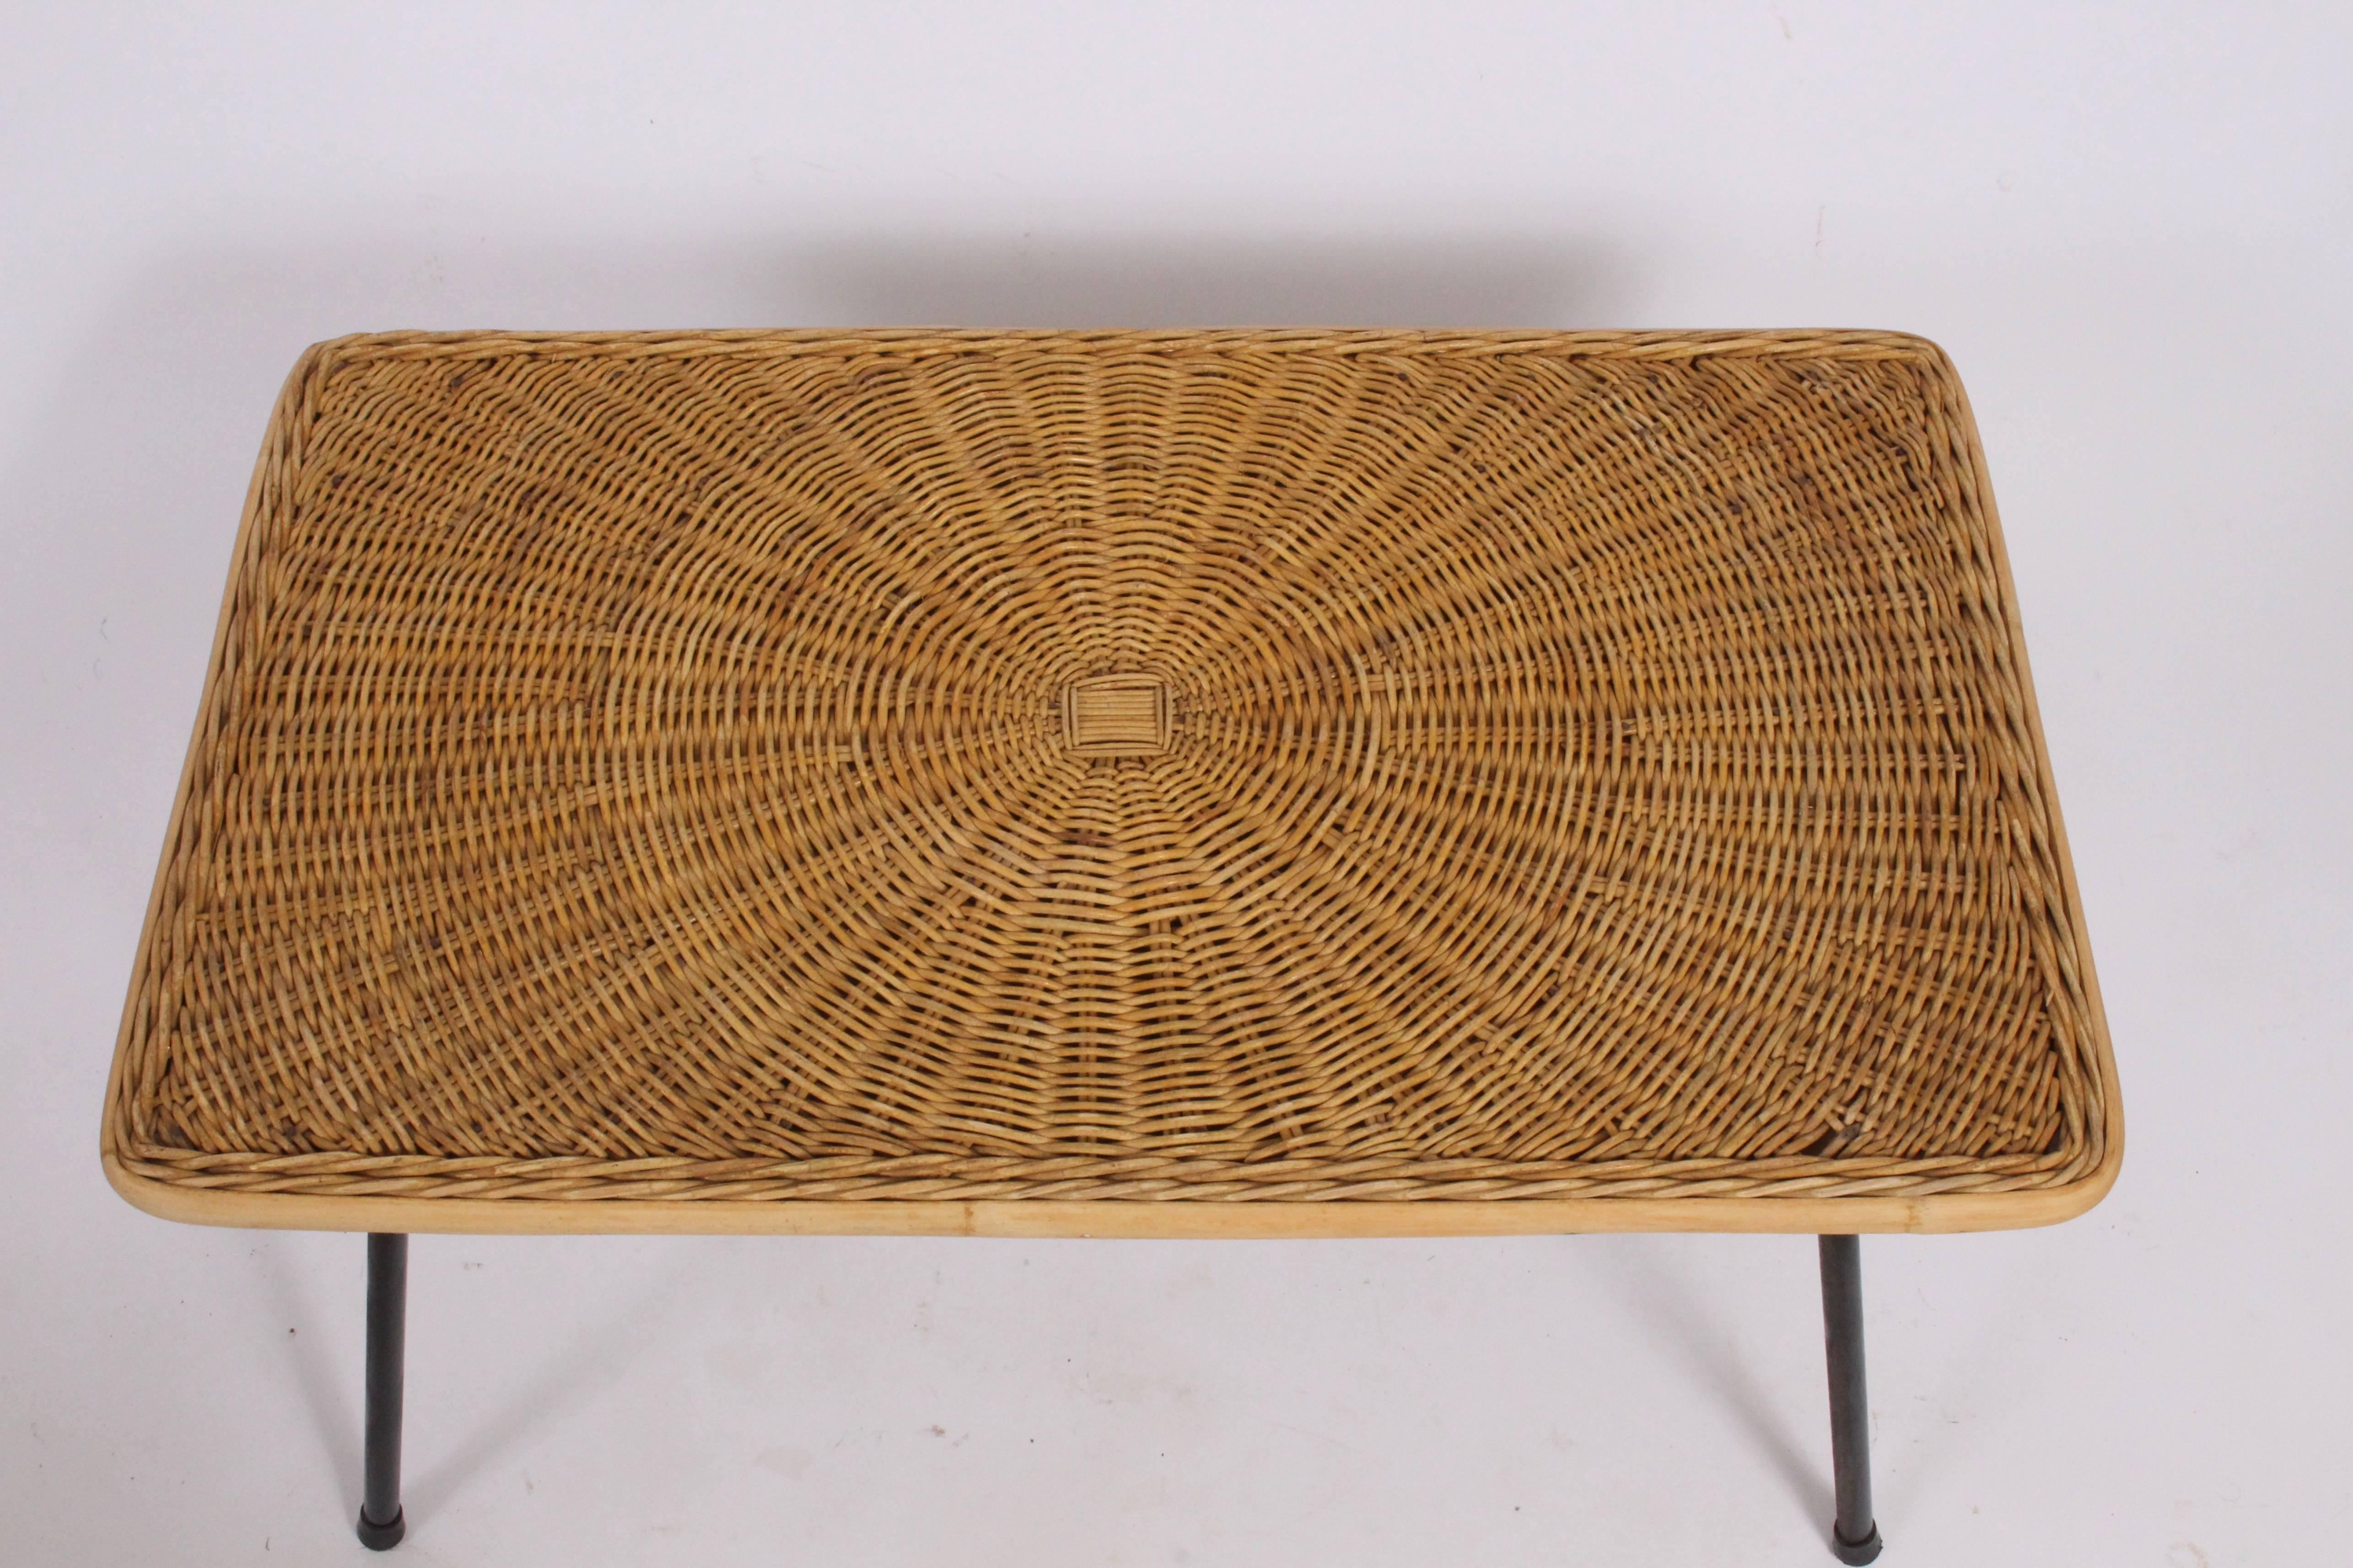 Arthur Umanoff for Raymor black wrought iron and woven wicker occasional table, 1950s. Rectangular woven wrapped surface with capped wrought iron legs. Classic. Fine design. Available for continental Standard Parcel delivery.
  